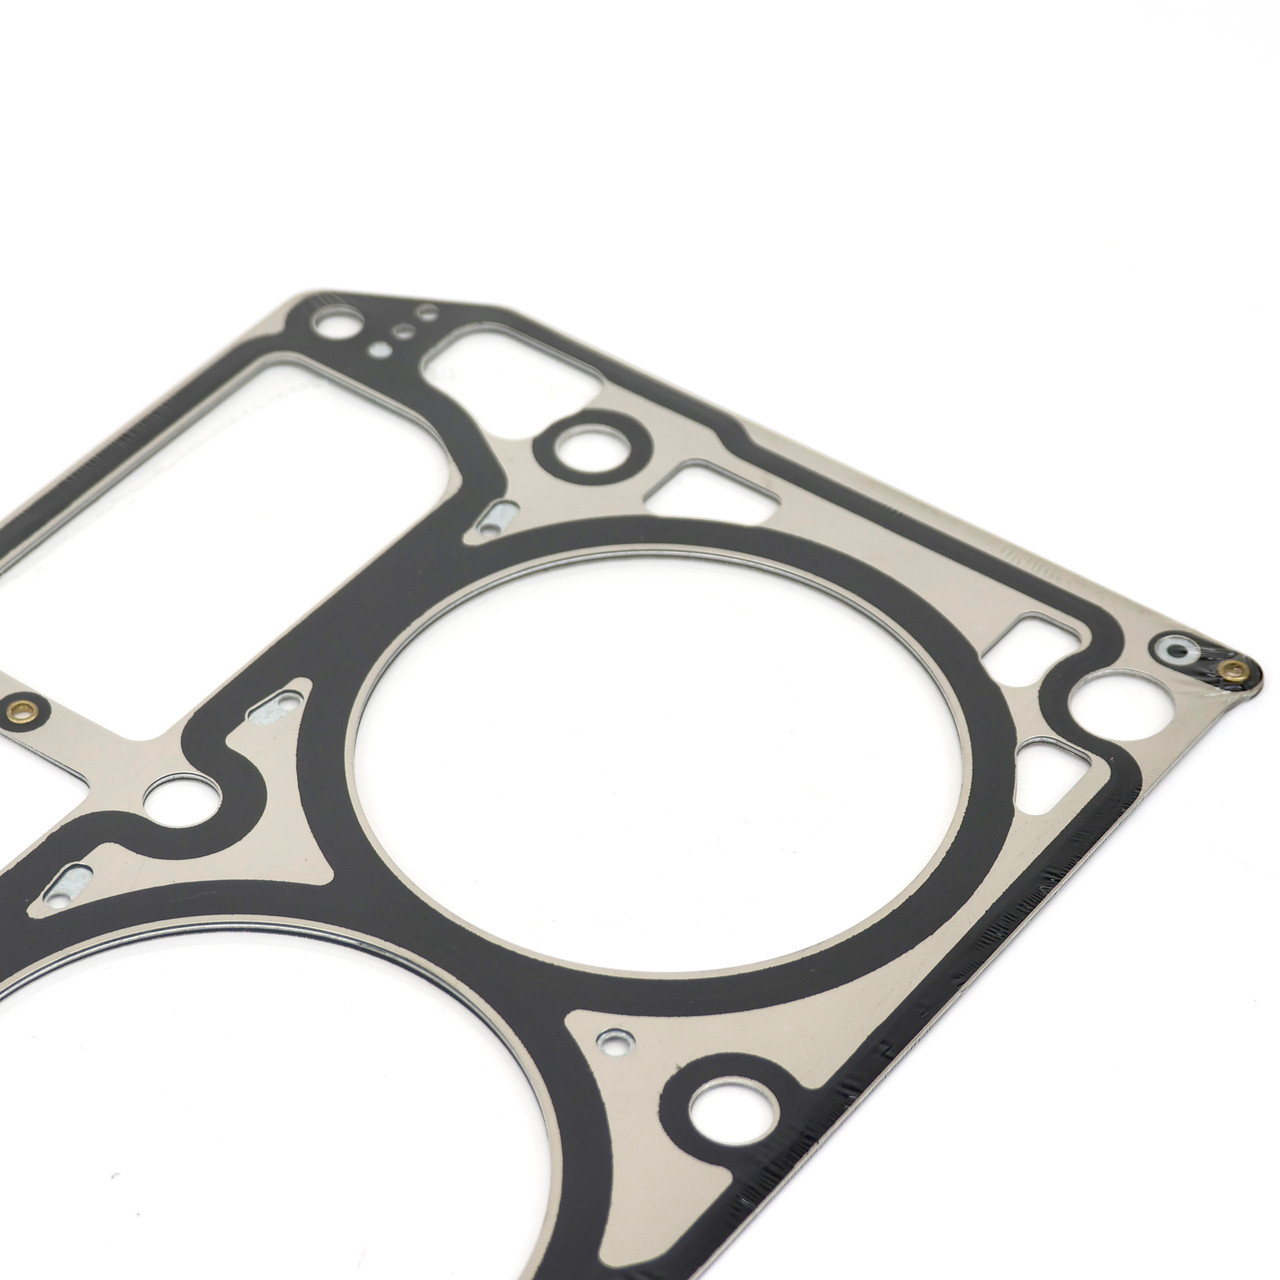 MLS Head Gasket for early Notched LS1 and LS Truck Heads 4.8L 5.3L 5.7L 806  853 862 Michigan Motorsports